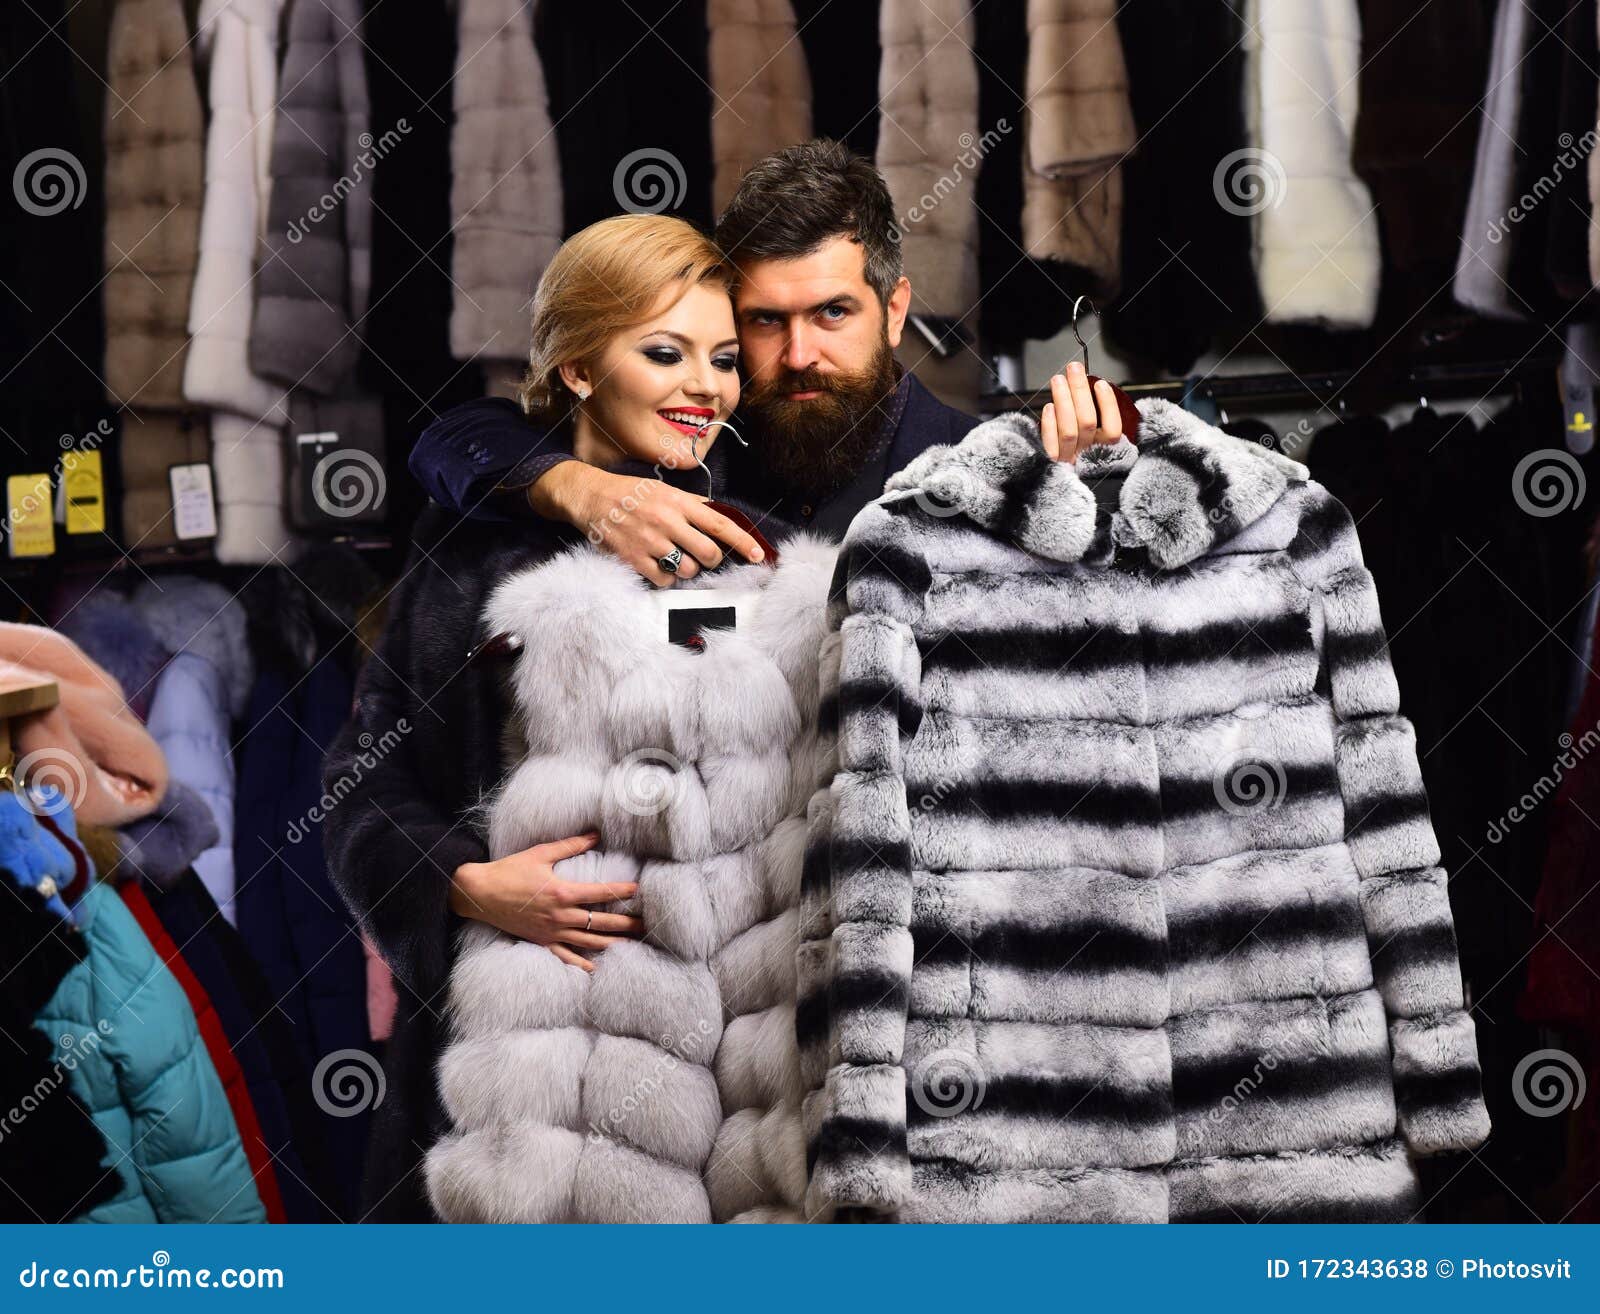 Man with Strict Face and Woman with Coats in Shop. Stock Photo - Image ...